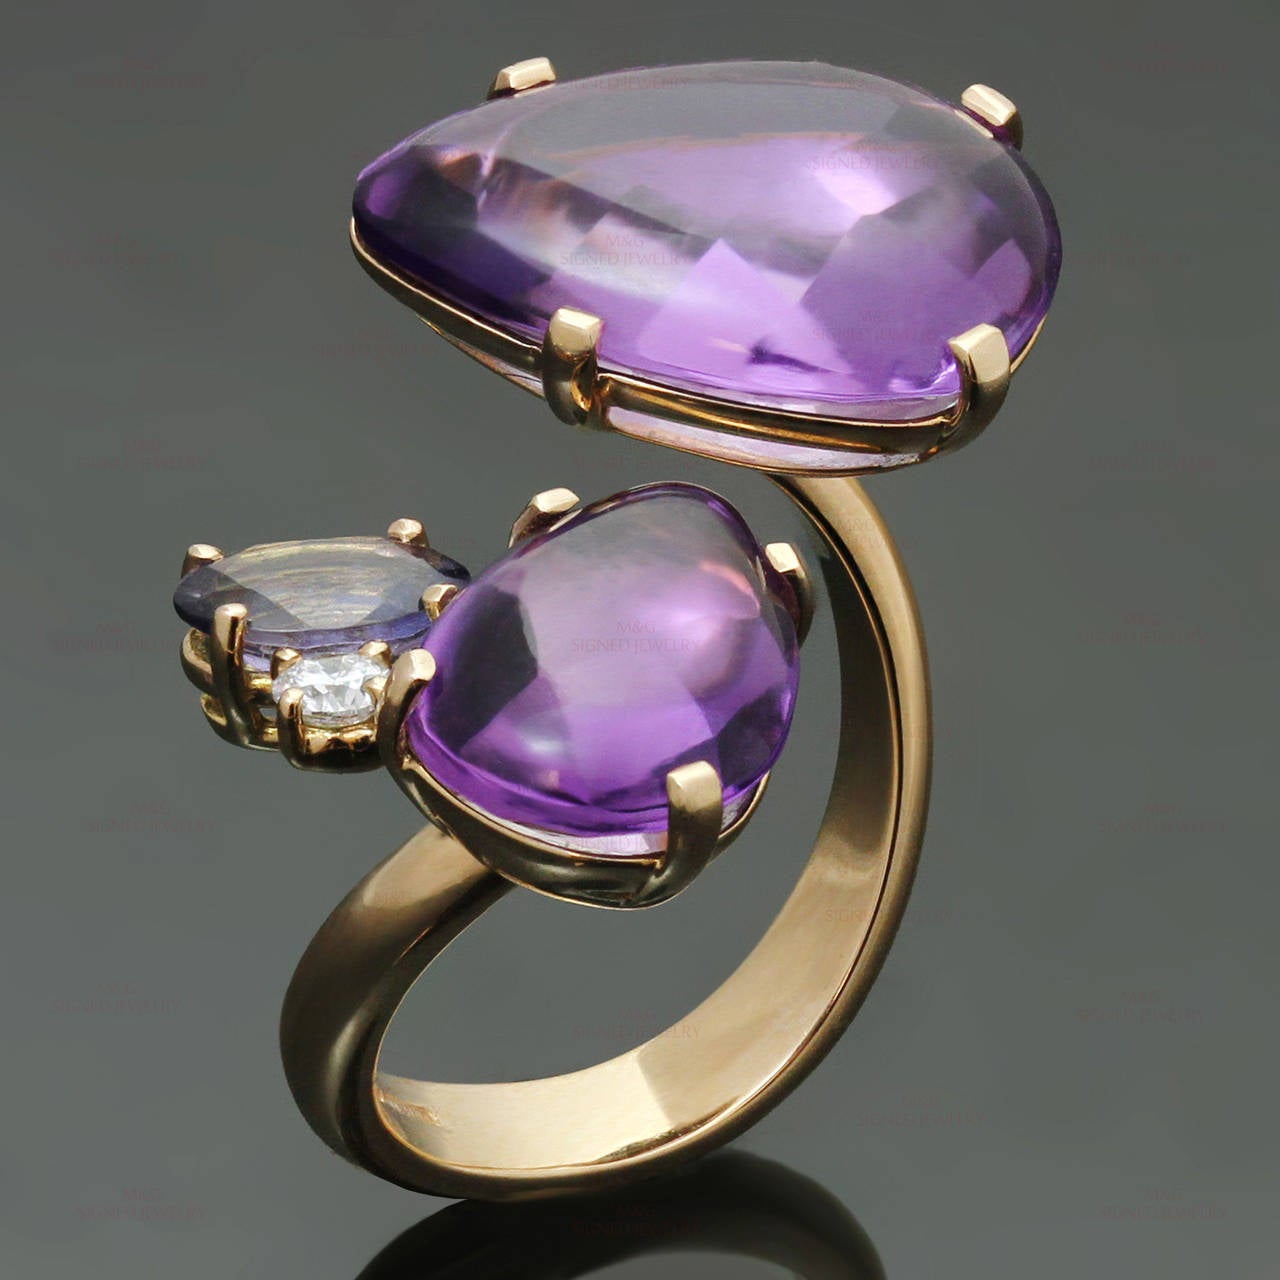 This elegant Antonini ring is crafted in 18k yellow gold and beautifully set with cabochon amethyst stones, a faceted iolite and a sparkling round brilliant-cut diamond. Made in Italy circa 2000s. Measurements: 0.66" (17mm) width. The ring size